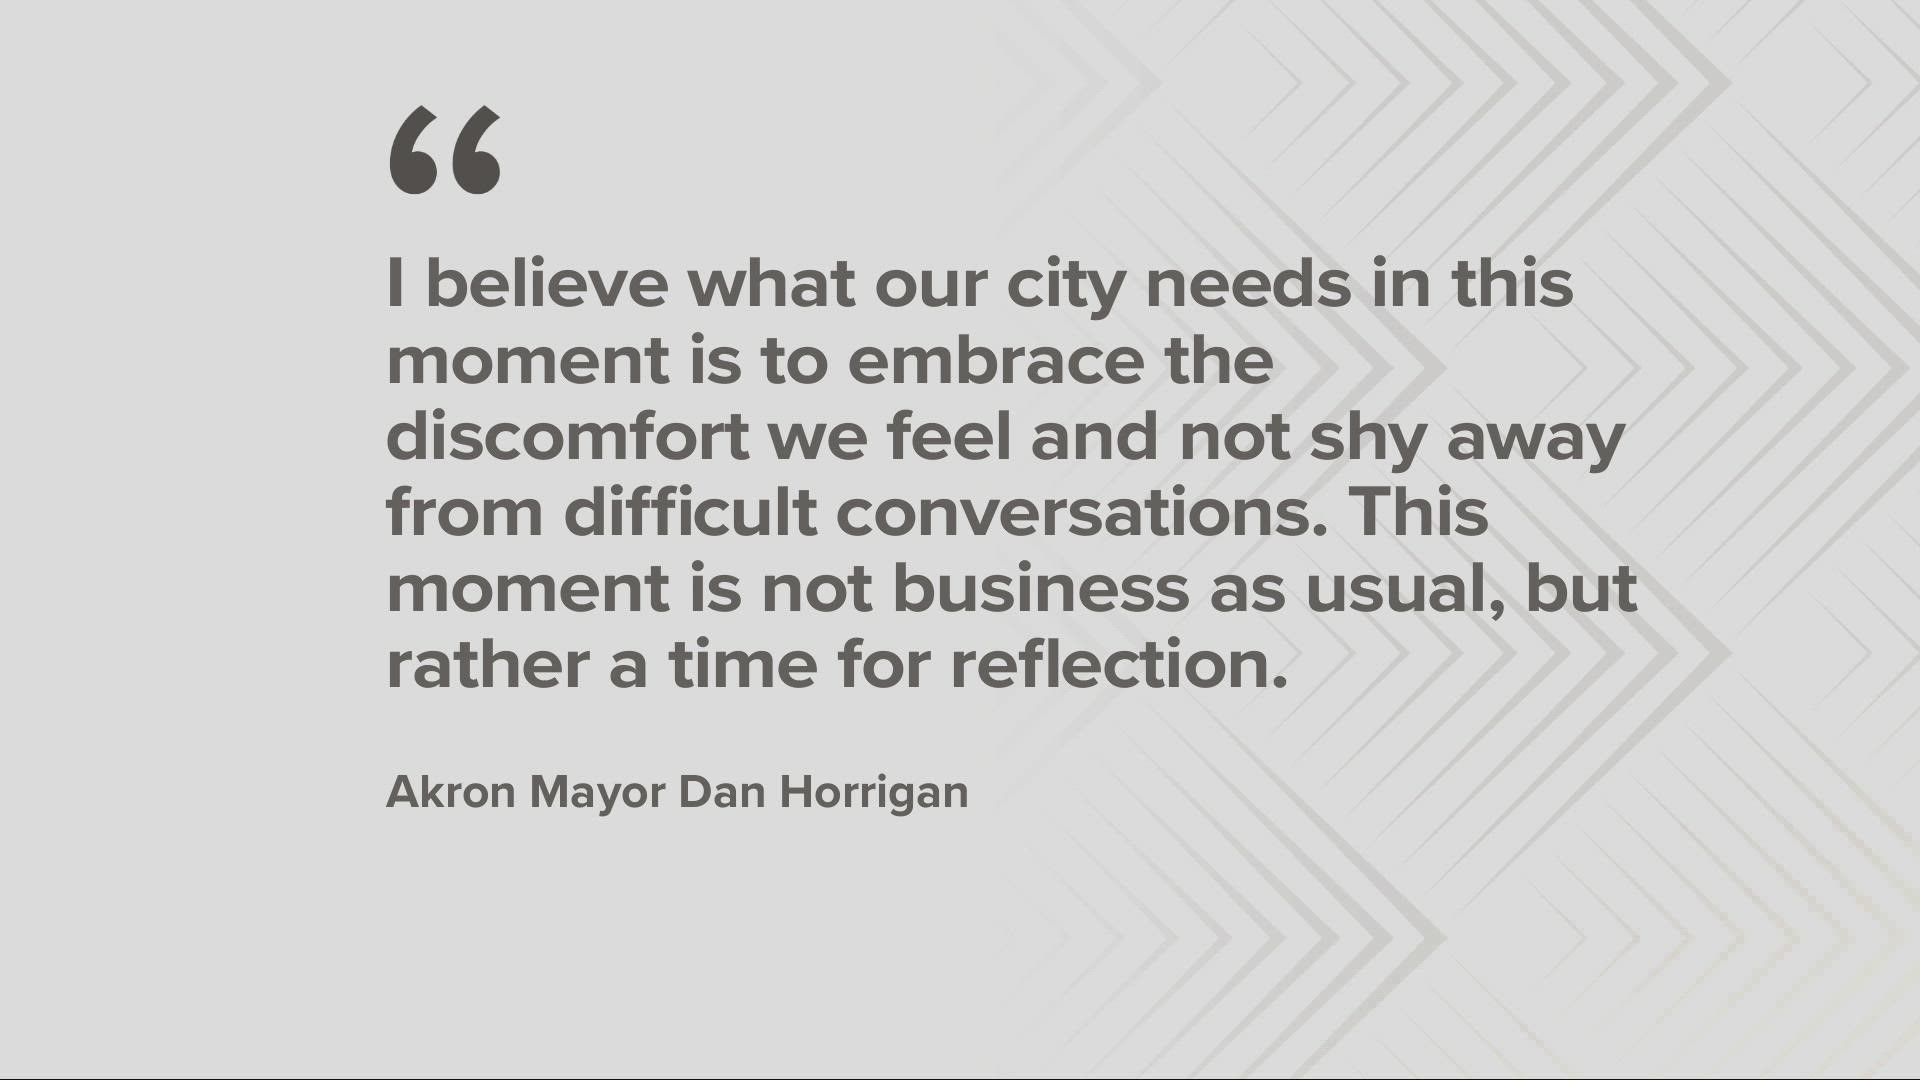 'I believe what our city needs in this moment is to embrace the discomfort we feel and not shy away from difficult conversations.'